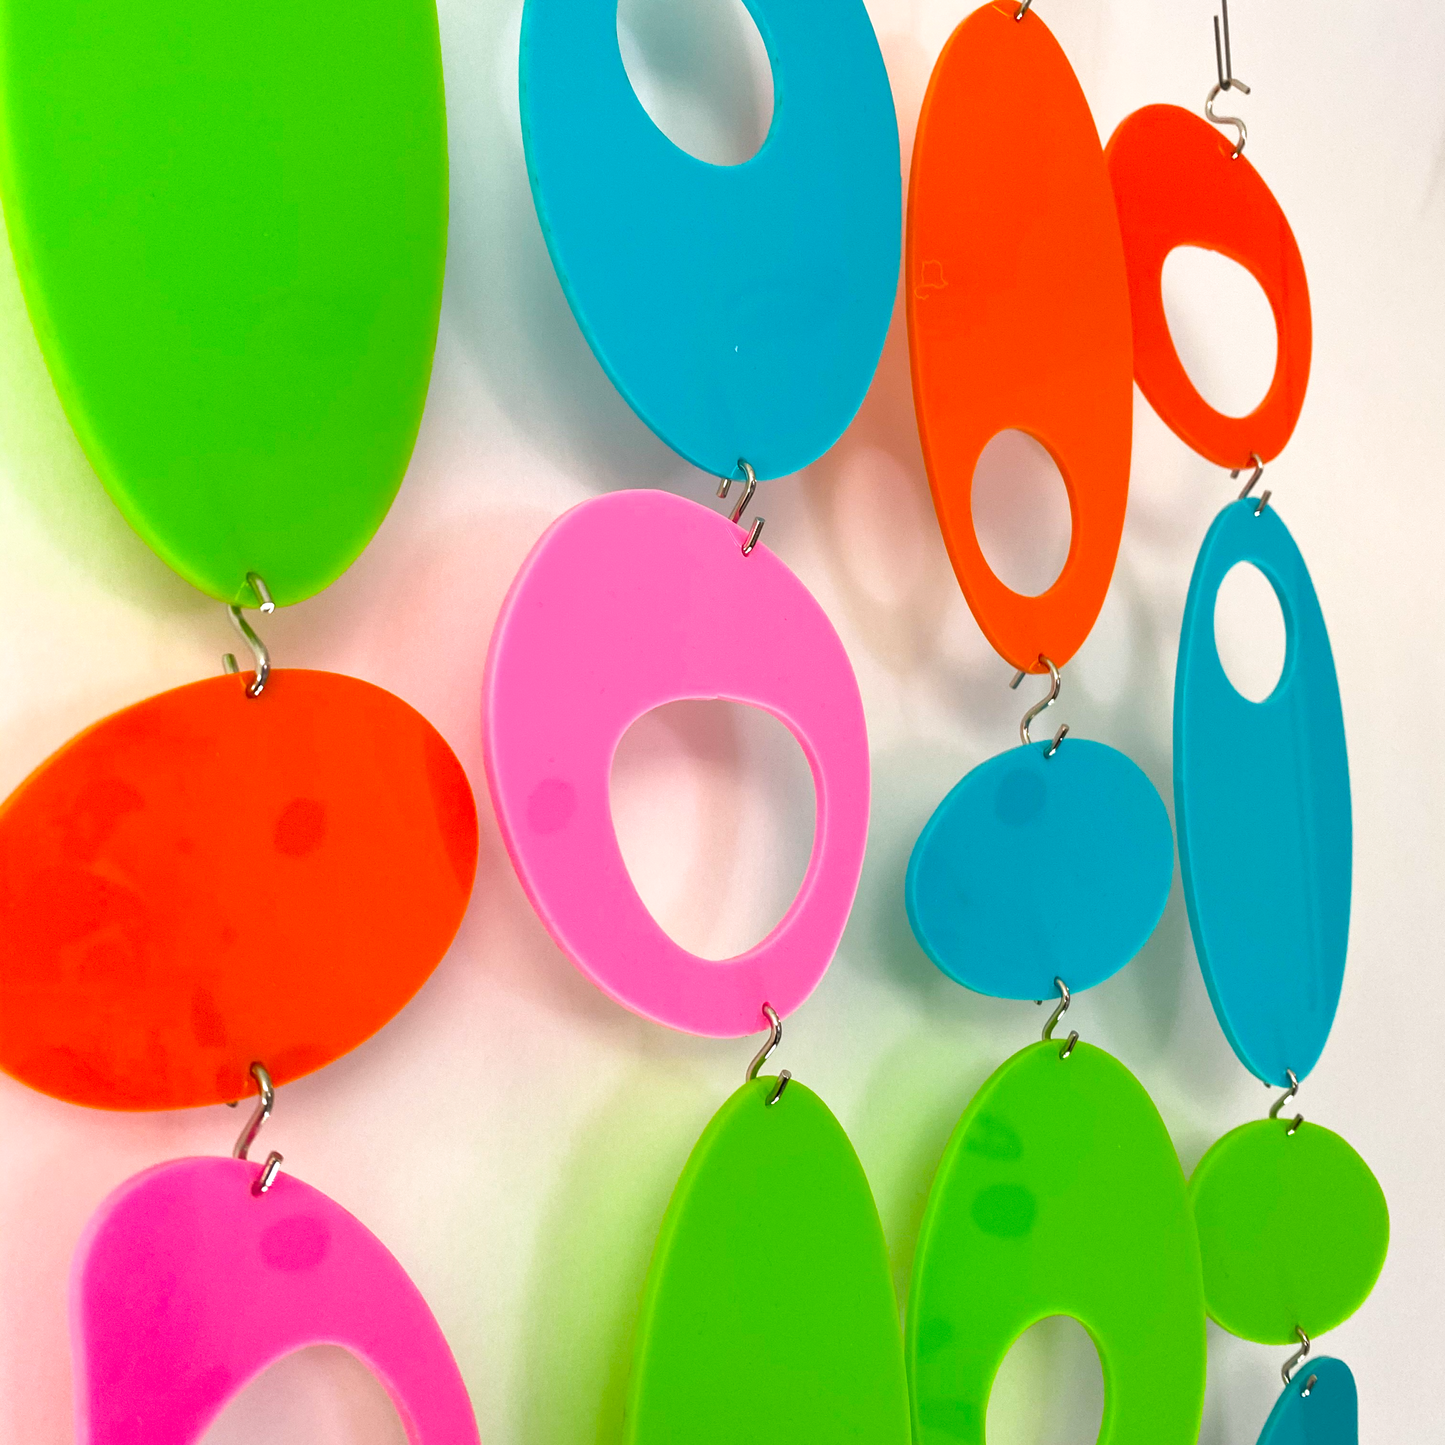 Closeup of Delightful acrylic retro 1970s shapes DIY Kit to create room divider, wall art, curtain, or mobiles in lime, aqua, orange, and hot pink by AtomicMobiles.com